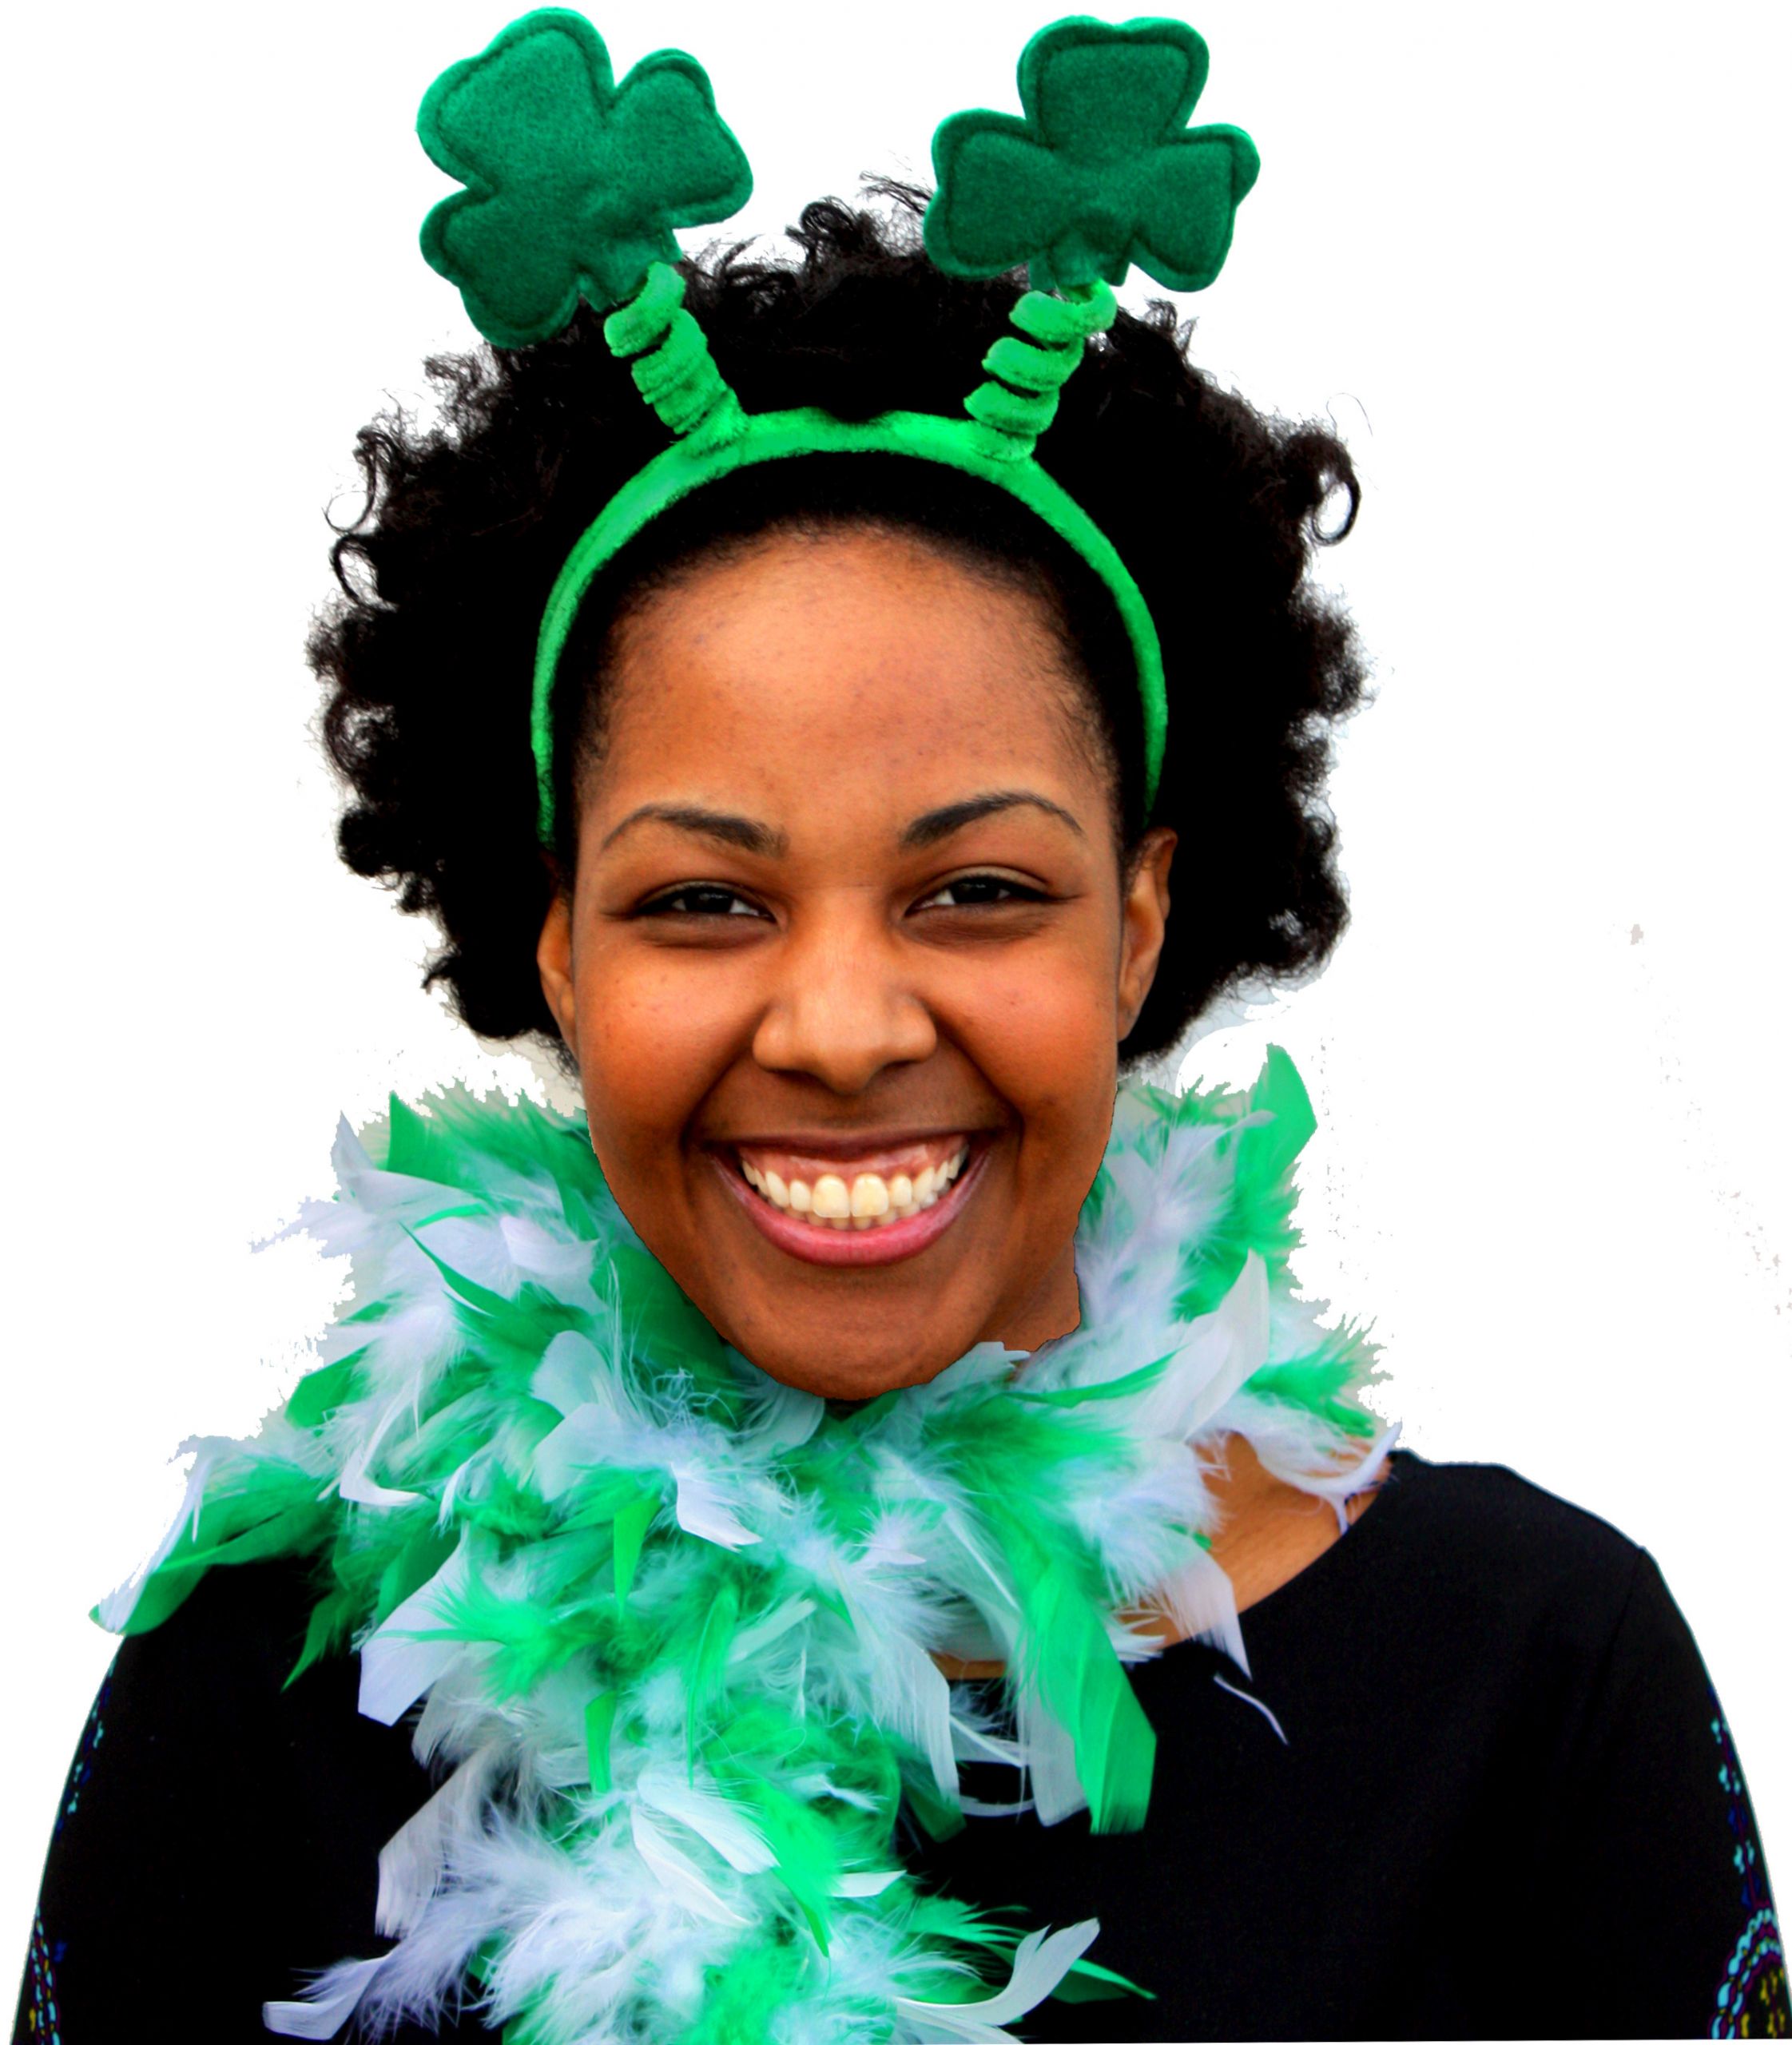 What To Wear For St Patrick's Day Party
 Wally’s Party Factory Reveals Seven Ways to Wear Green